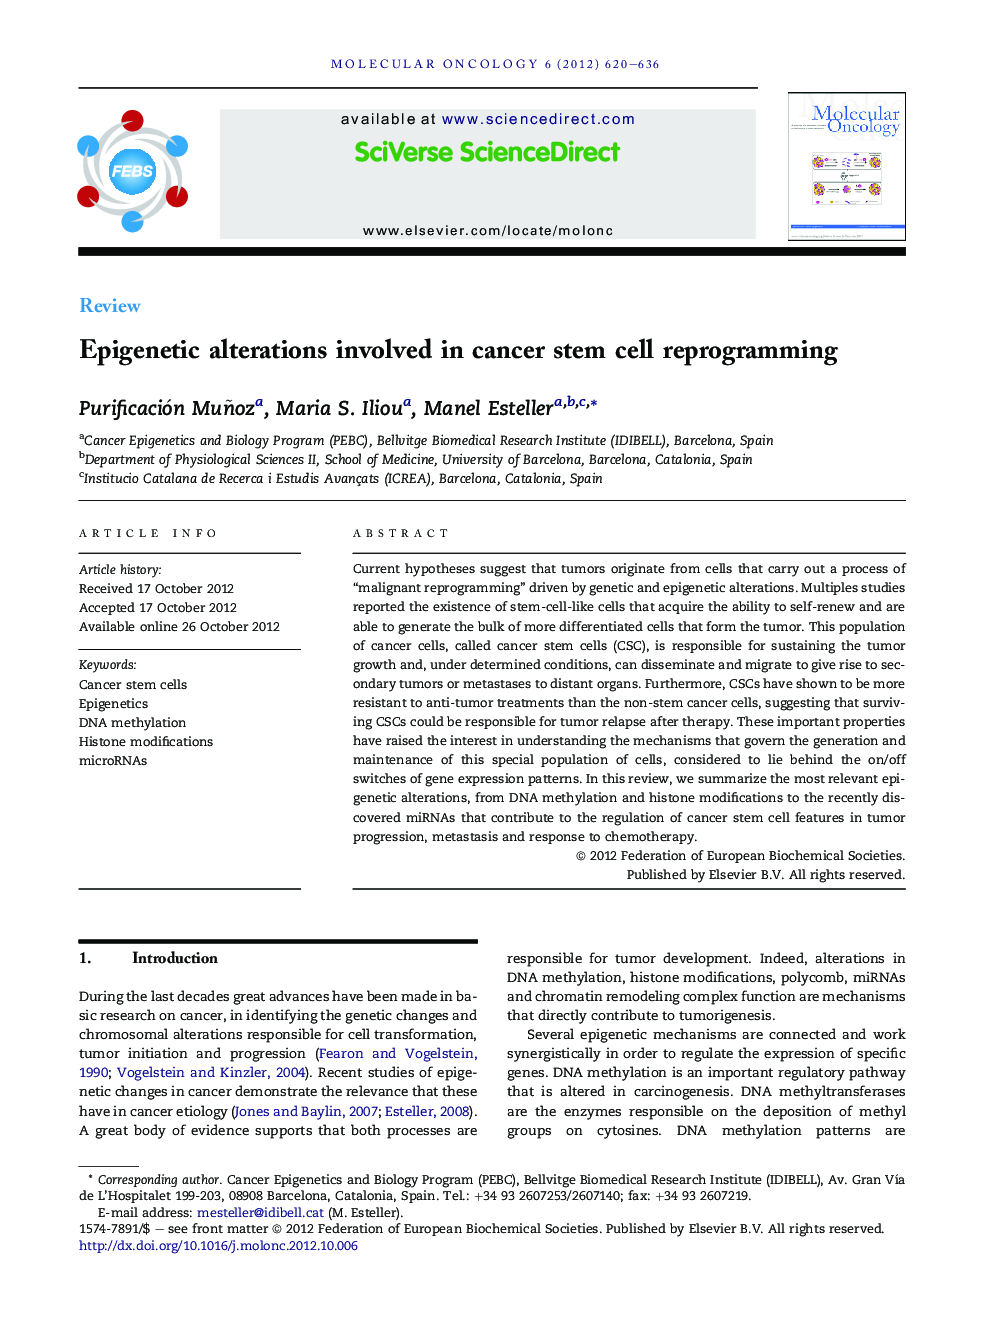 Epigenetic alterations involved in cancer stem cell reprogramming